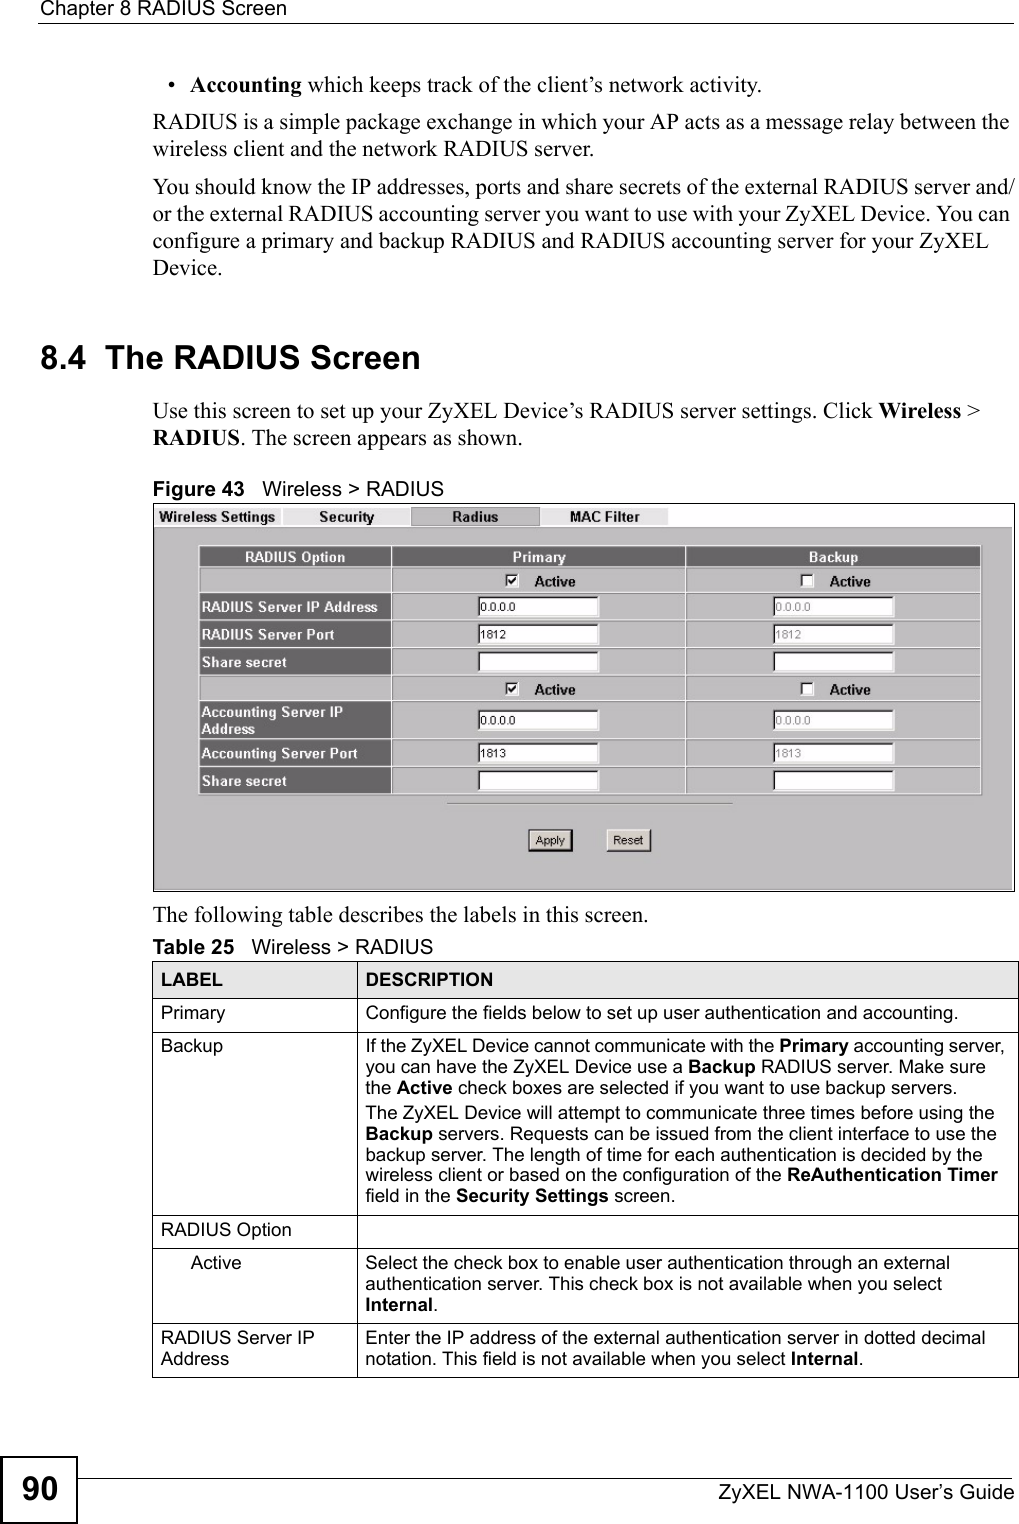 Chapter 8 RADIUS ScreenZyXEL NWA-1100 User’s Guide90•Accounting which keeps track of the client’s network activity. RADIUS is a simple package exchange in which your AP acts as a message relay between the wireless client and the network RADIUS server. You should know the IP addresses, ports and share secrets of the external RADIUS server and/or the external RADIUS accounting server you want to use with your ZyXEL Device. You can configure a primary and backup RADIUS and RADIUS accounting server for your ZyXEL Device.8.4  The RADIUS ScreenUse this screen to set up your ZyXEL Device’s RADIUS server settings. Click Wireless &gt; RADIUS. The screen appears as shown.Figure 43   Wireless &gt; RADIUSThe following table describes the labels in this screen.Table 25   Wireless &gt; RADIUSLABEL DESCRIPTIONPrimary Configure the fields below to set up user authentication and accounting.Backup If the ZyXEL Device cannot communicate with the Primary accounting server, you can have the ZyXEL Device use a Backup RADIUS server. Make sure the Active check boxes are selected if you want to use backup servers.The ZyXEL Device will attempt to communicate three times before using the Backup servers. Requests can be issued from the client interface to use the backup server. The length of time for each authentication is decided by the wireless client or based on the configuration of the ReAuthentication Timer field in the Security Settings screen.RADIUS OptionActive Select the check box to enable user authentication through an external authentication server. This check box is not available when you select Internal.RADIUS Server IP AddressEnter the IP address of the external authentication server in dotted decimal notation. This field is not available when you select Internal.